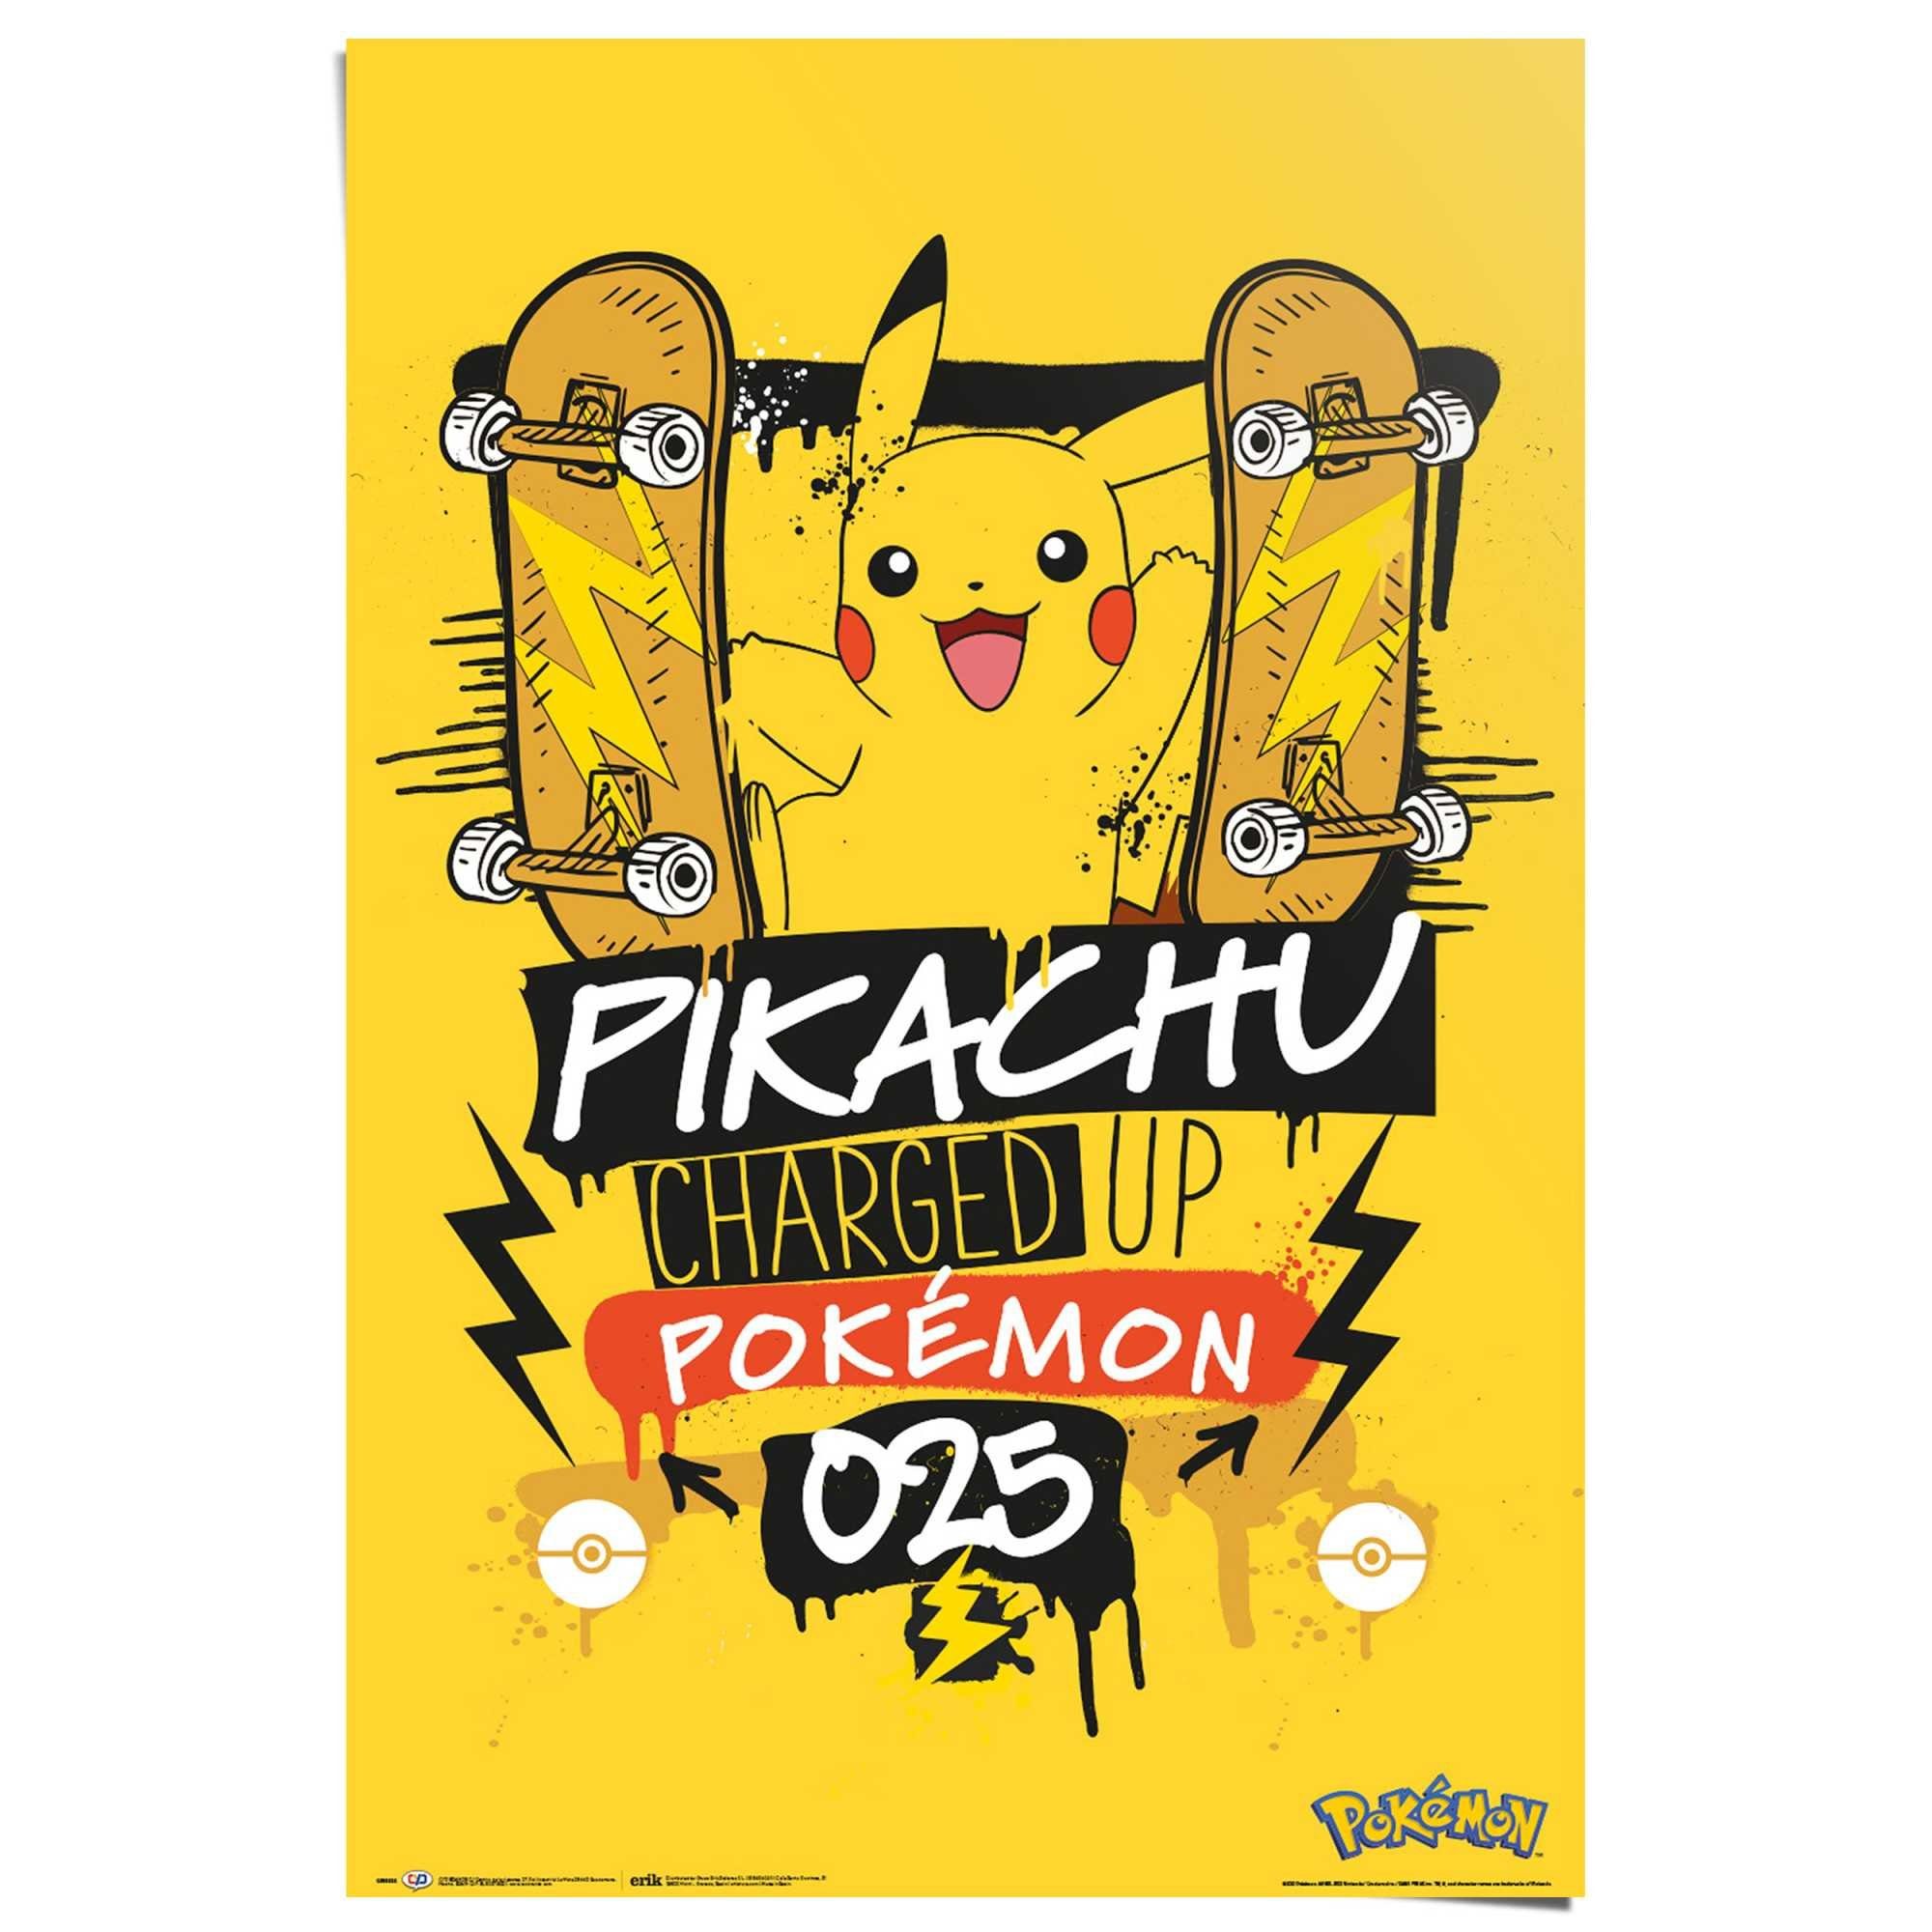 Poster pikachu 025 Pokemon - charged Reinders! up